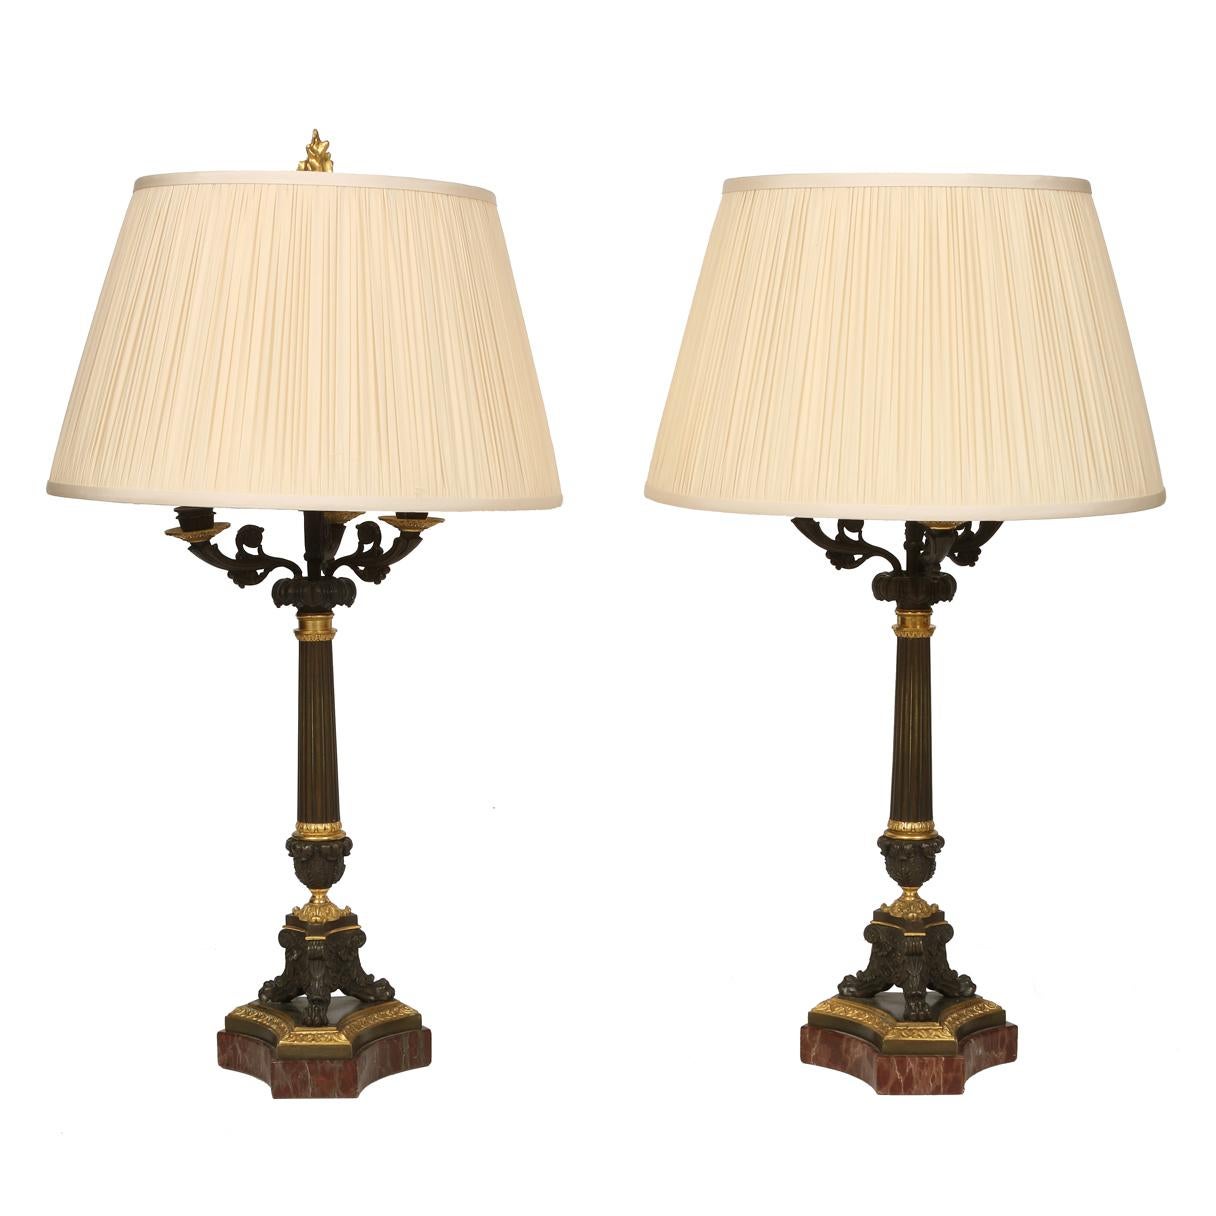 A pair of French Napoleon bronze and gilt metal candlestick lamps with silk shades, on a tripod marble base.